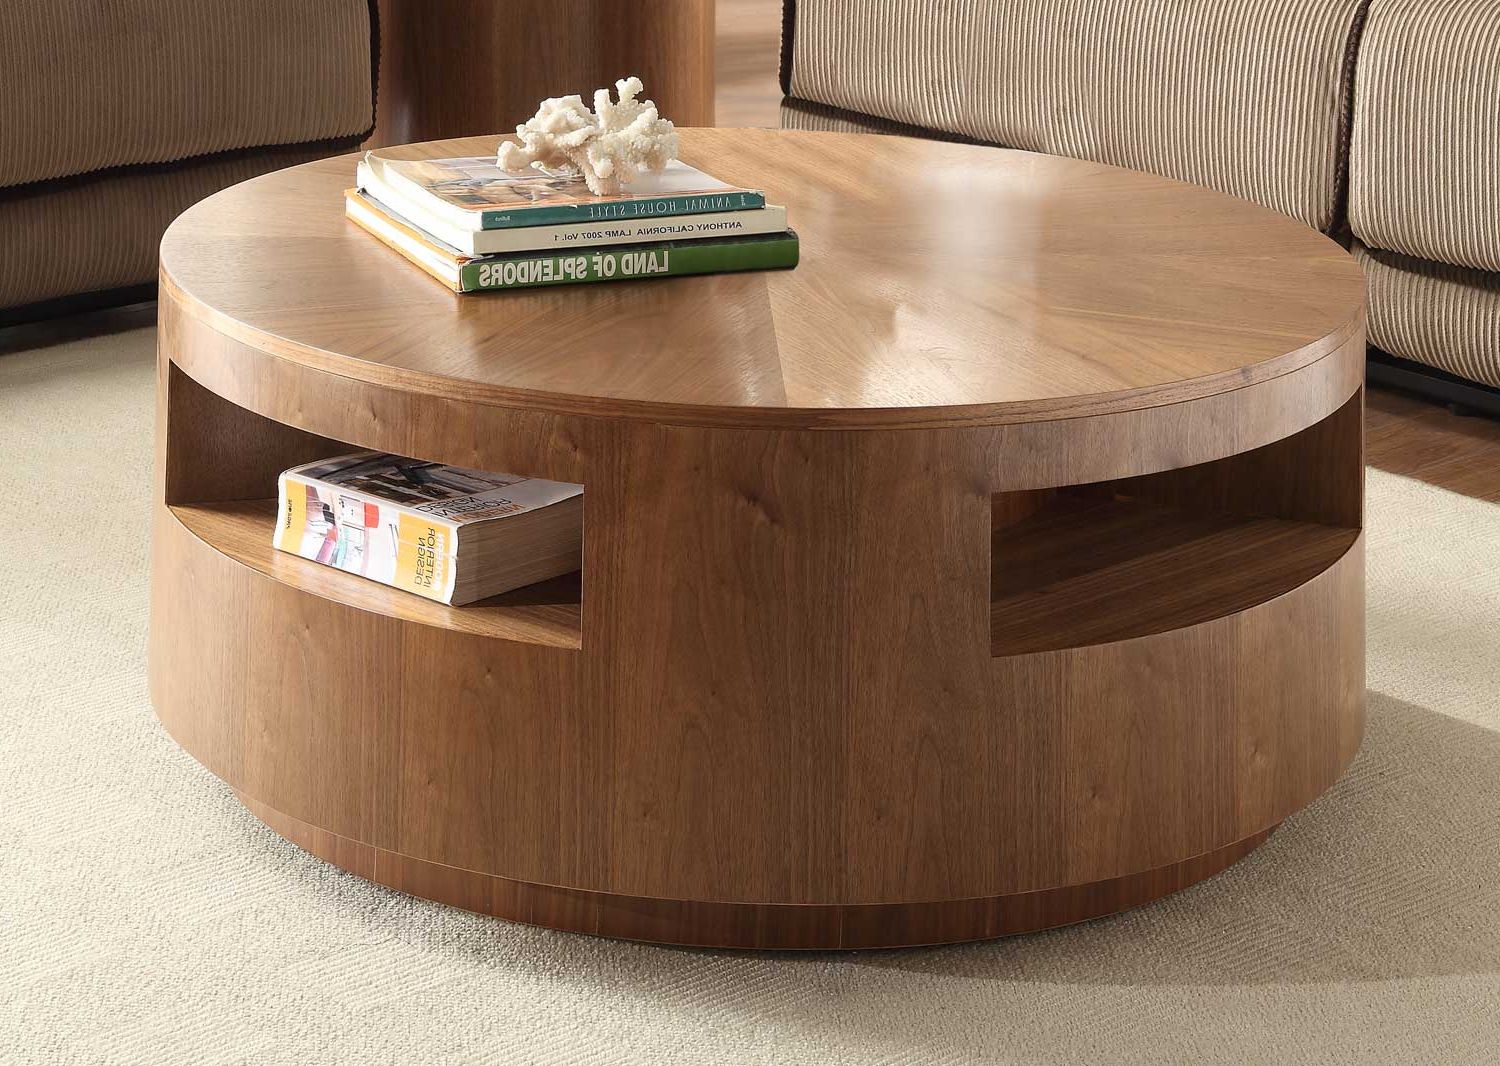 The Round Coffee Tables With Storage – The Simple And Compact Furniture With Regard To Most Popular Coffee Tables With Storage (View 8 of 15)